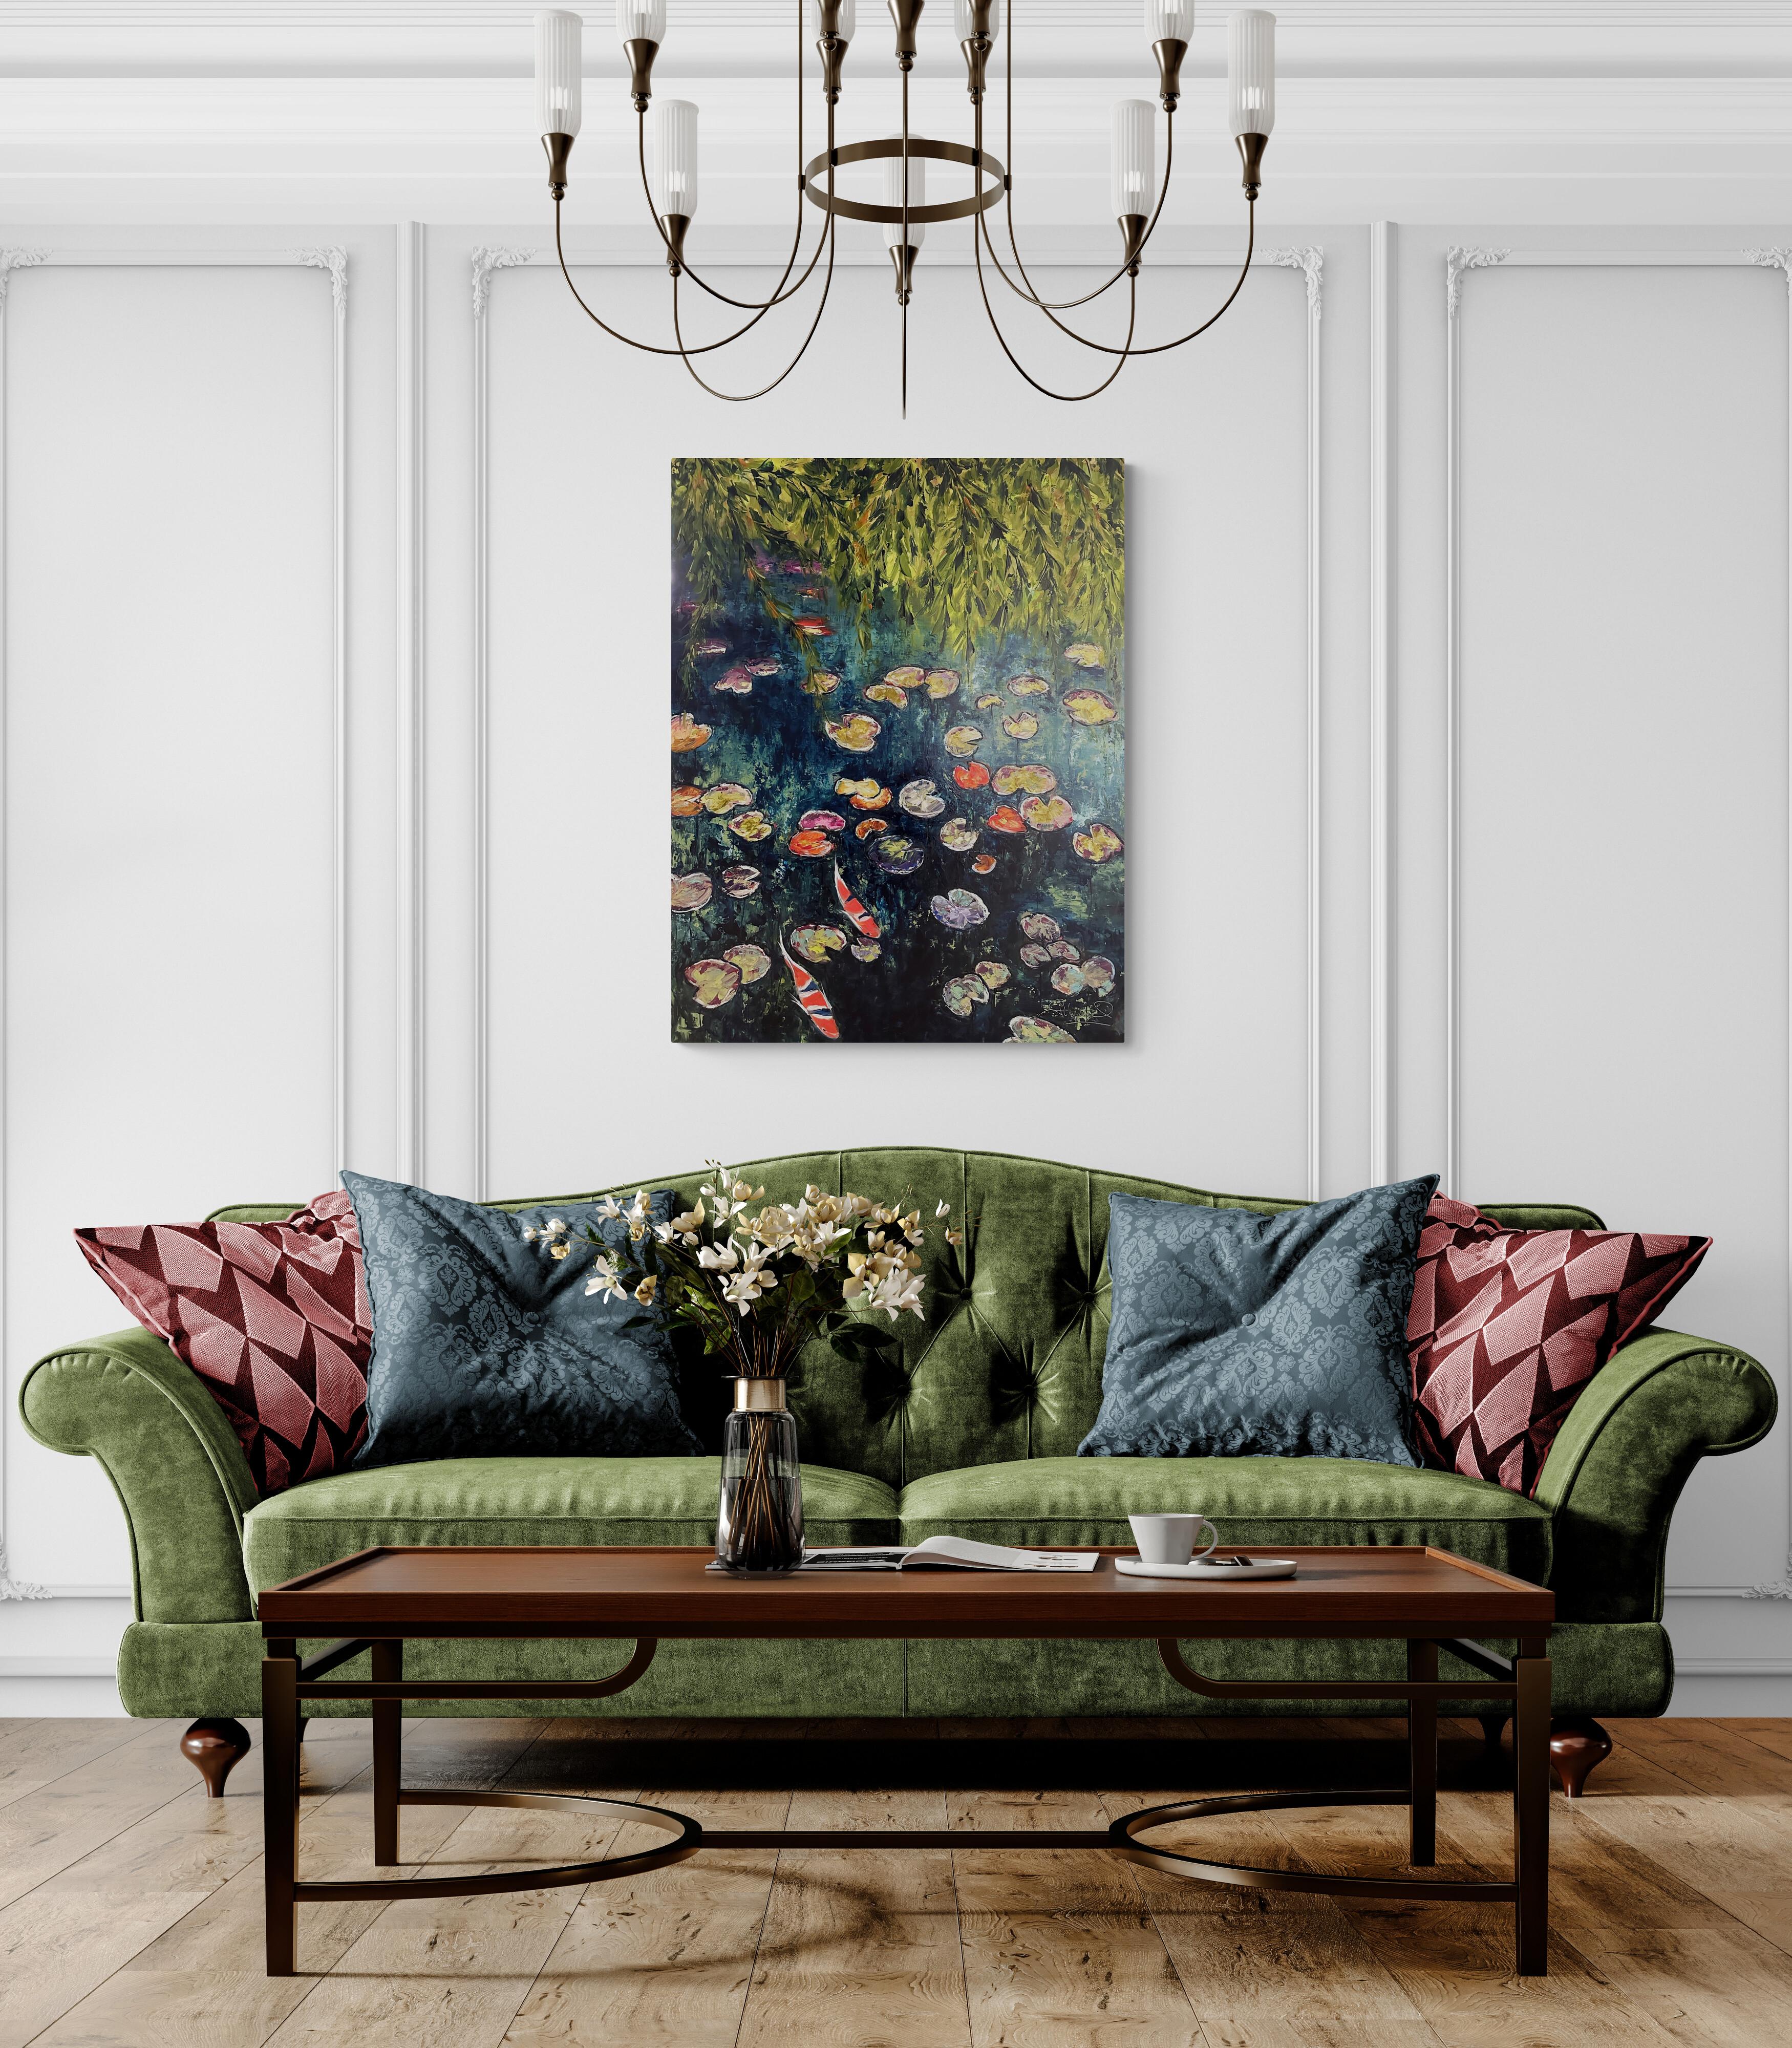 Genevieve Hamel
Deep Water
Oil on Wood Panel
Year: 2024
Size: 40 x 30 x 1.625 inches
Signed by hand
COA provided
Ref.: 924802-2088

Somewhere in the bottom of this pond, swim beautiful koi fishes. Their bright colors are almost getting in complement